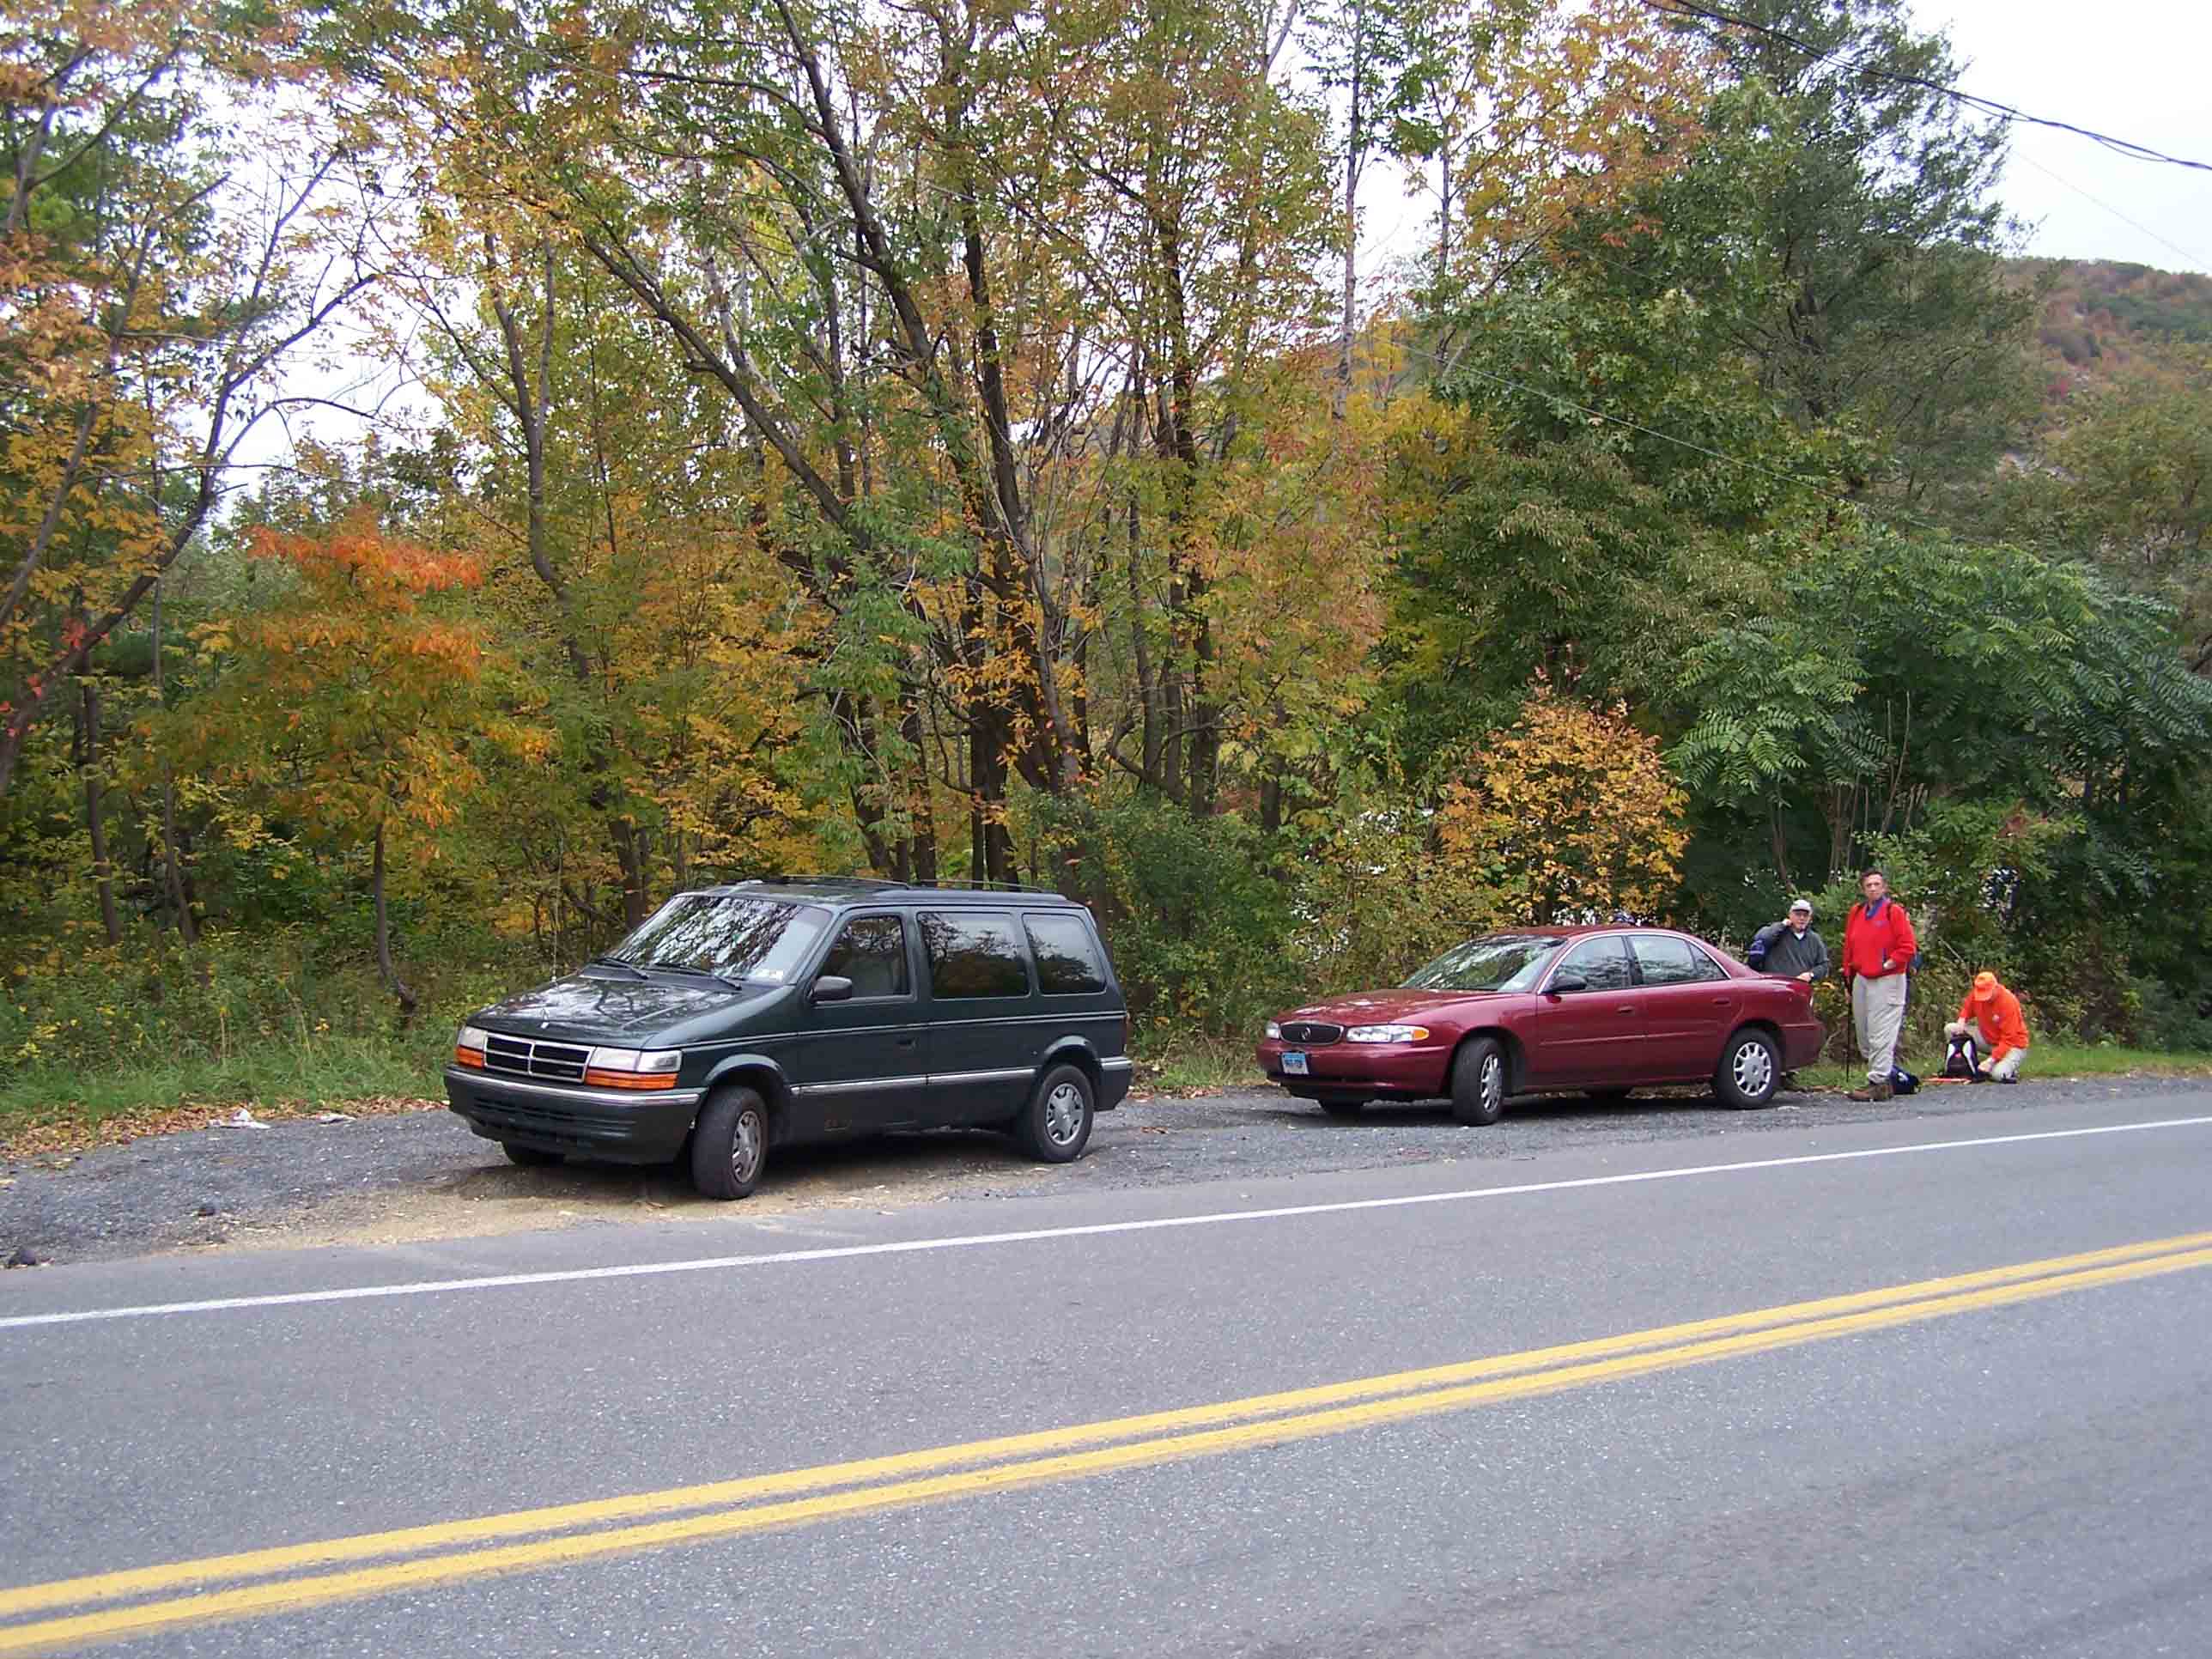 mm 20.4: Alternate parking at Lehigh Gap. This is on PA 145, just south of junction with PA 248.